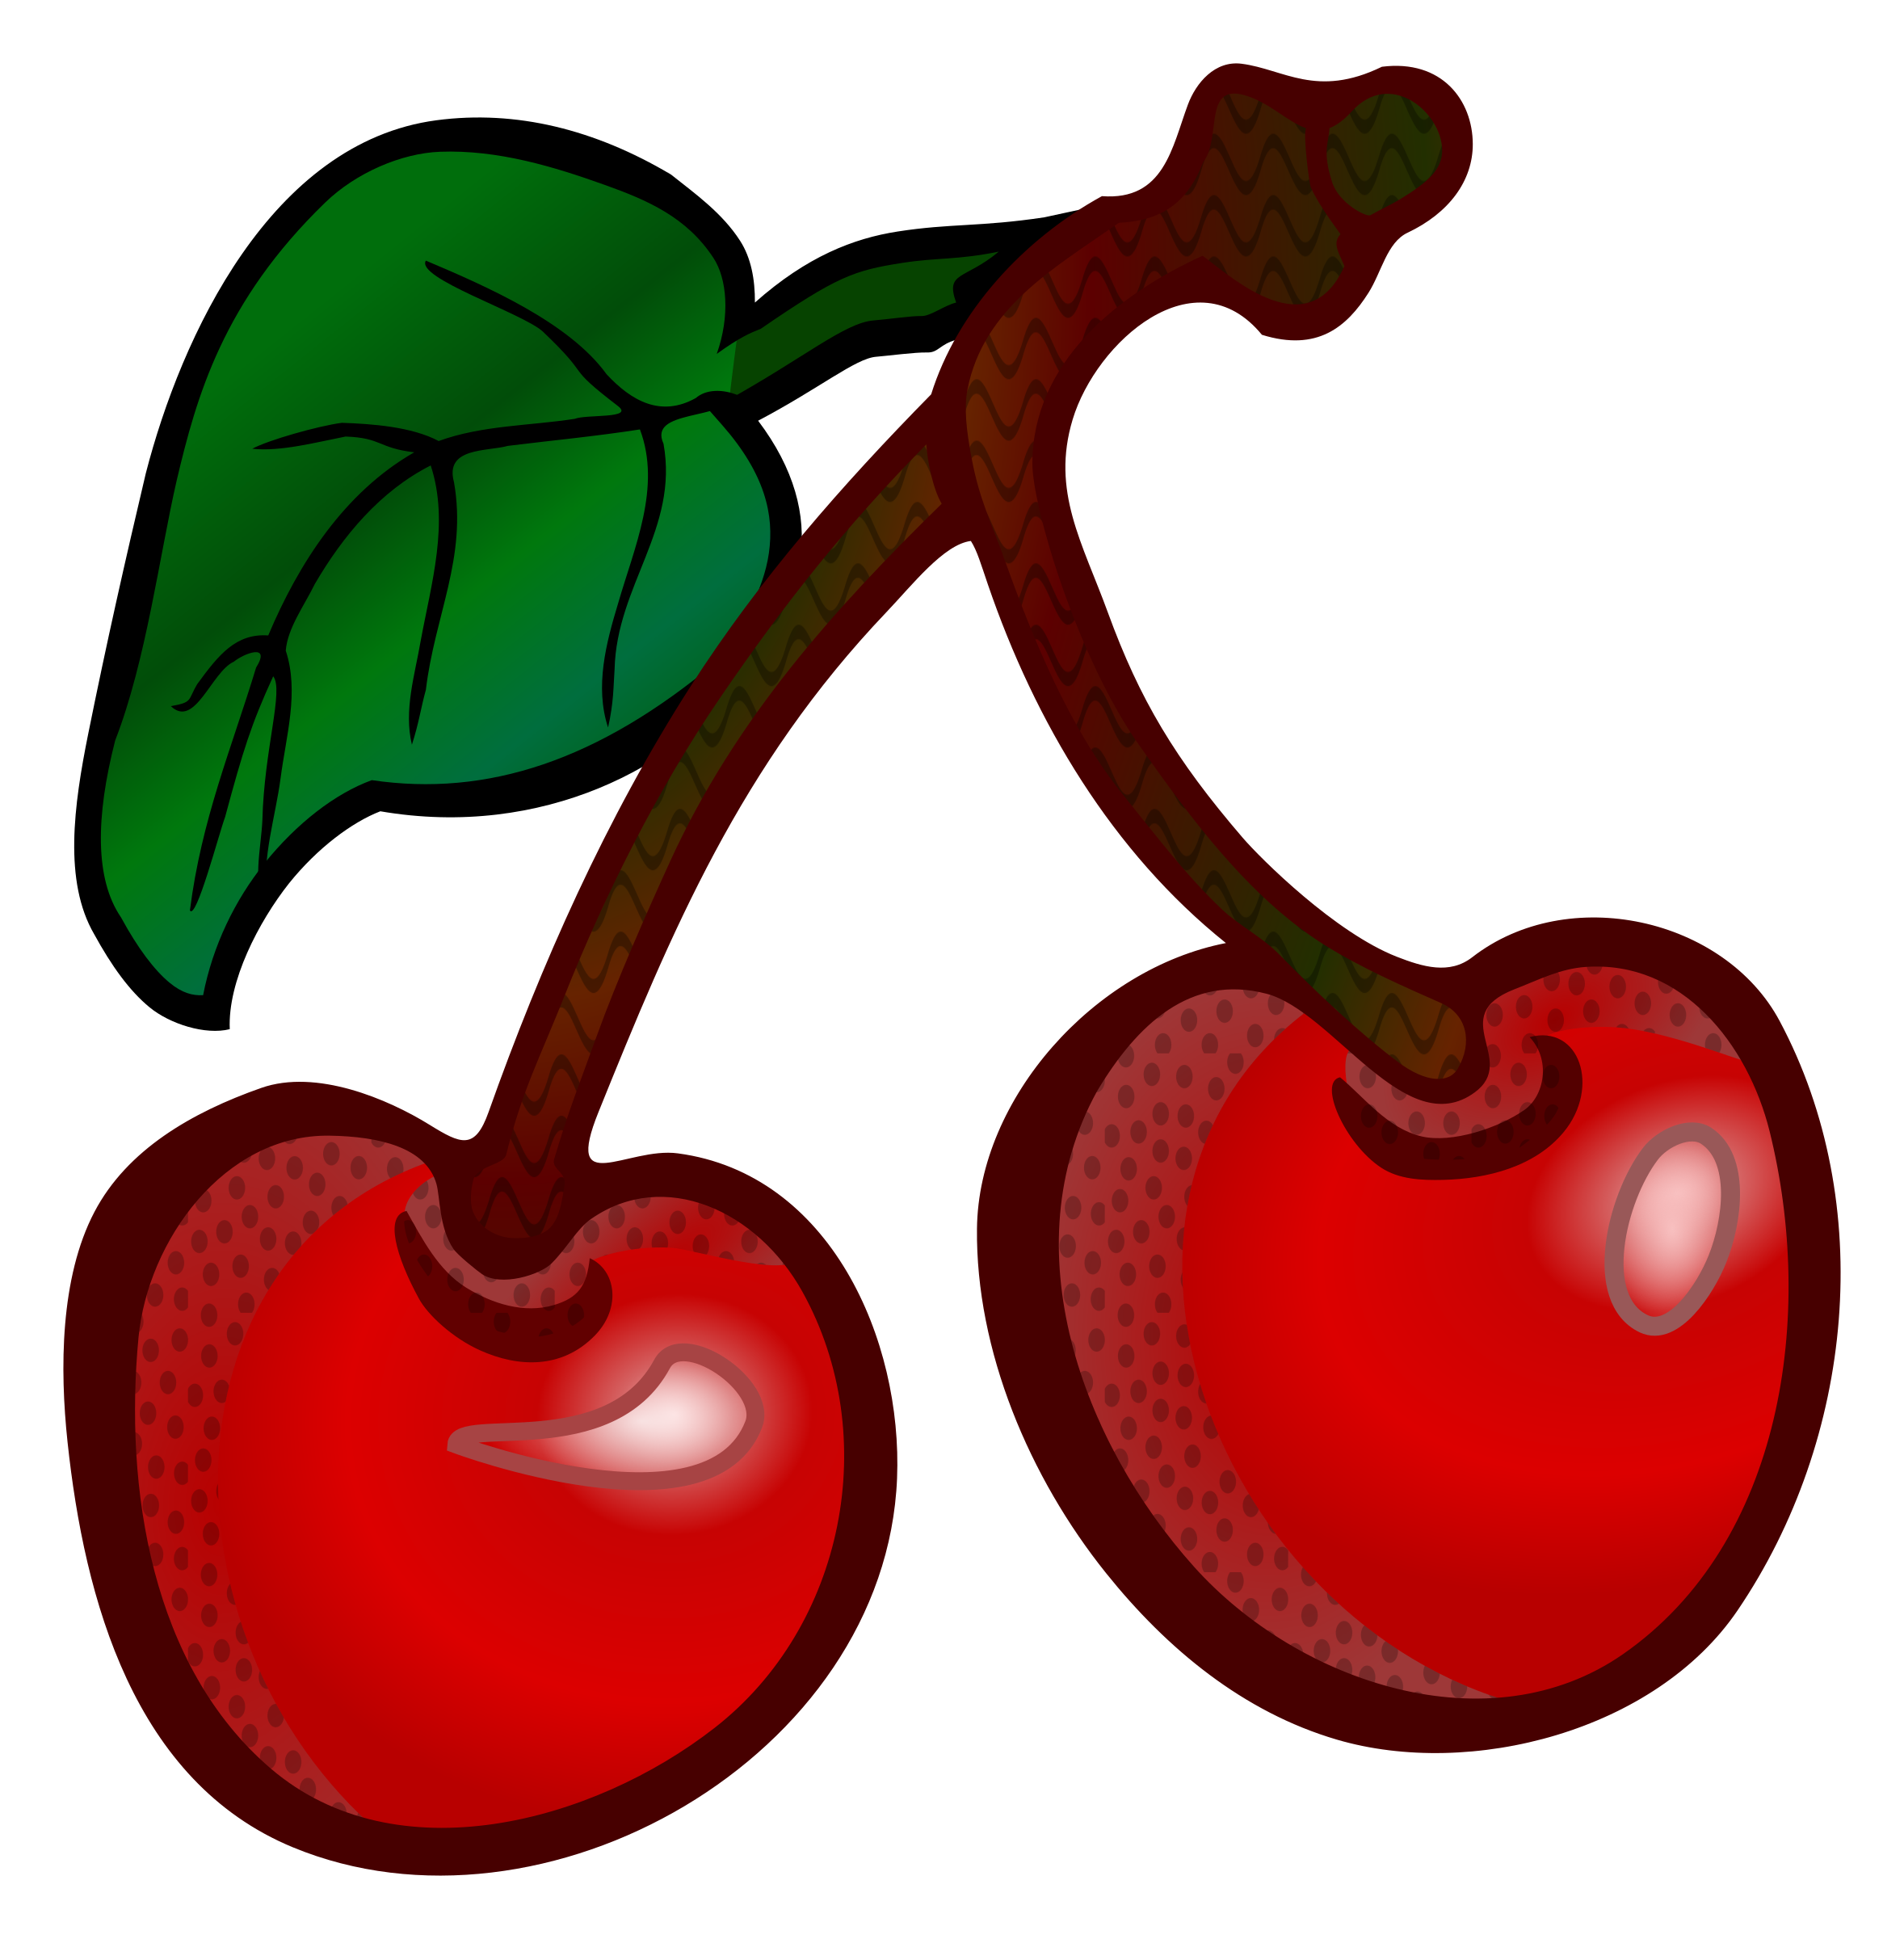 outline clipart cherry outline cherry transparent free for download on webstockreview 2020 outline clipart cherry outline cherry